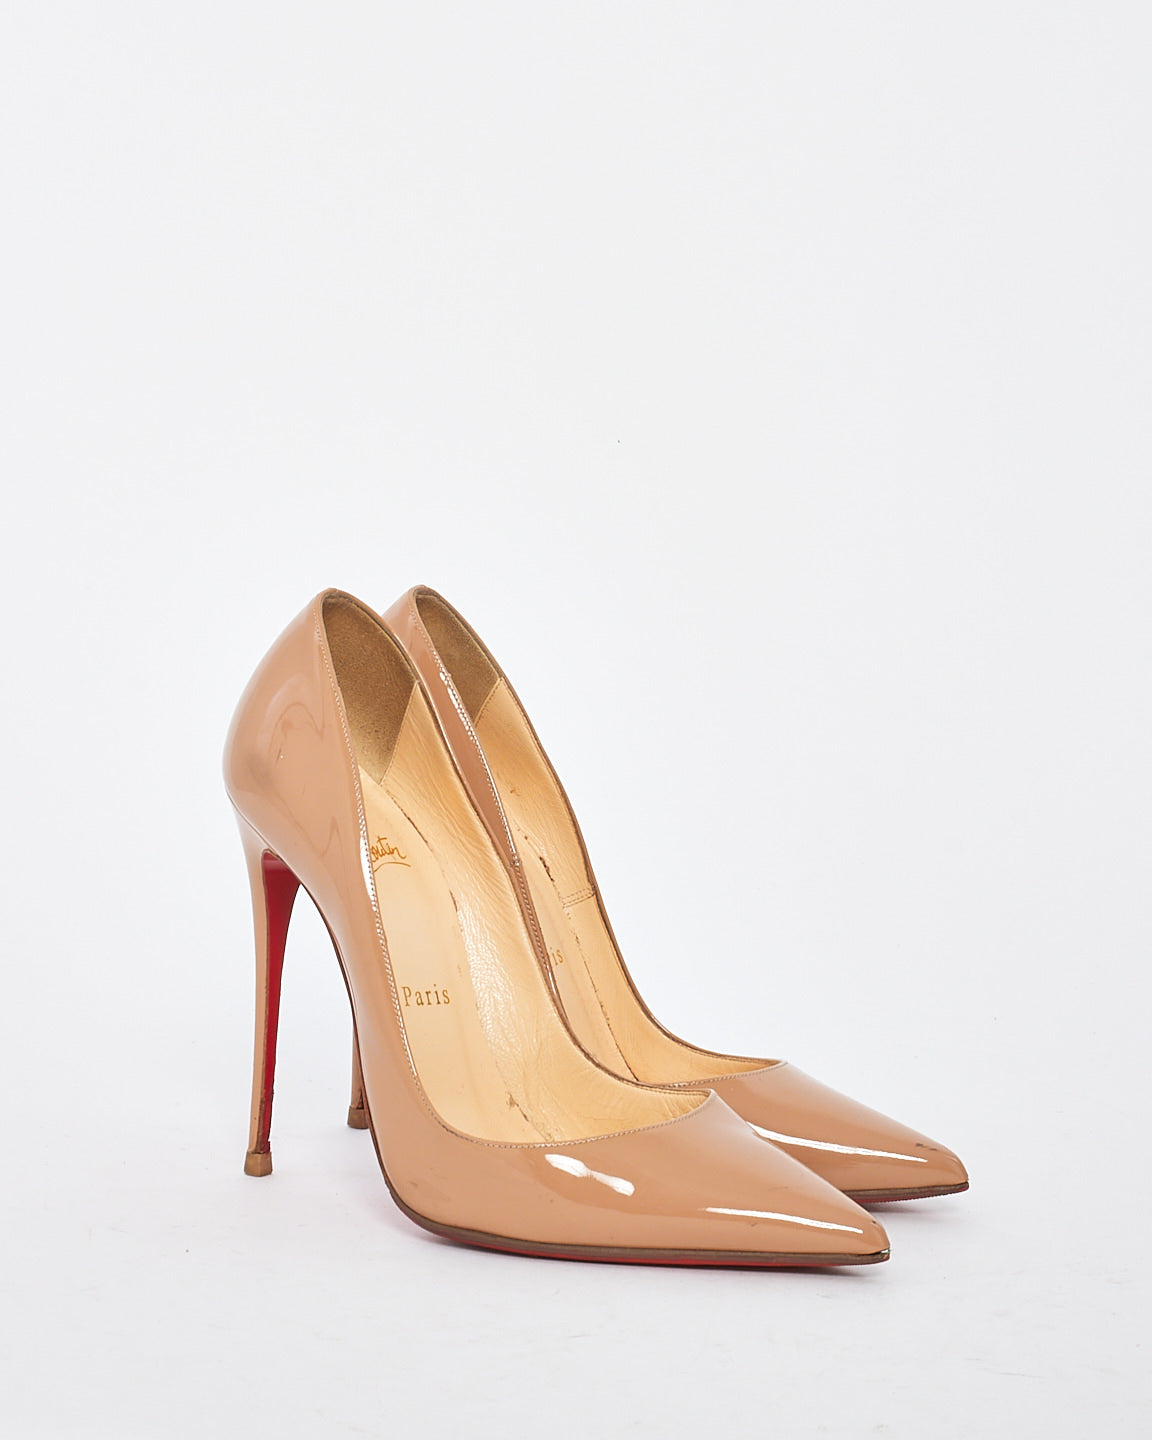 Christian Louboutin Nude Patent Leather So Kate Pumps - 37.5